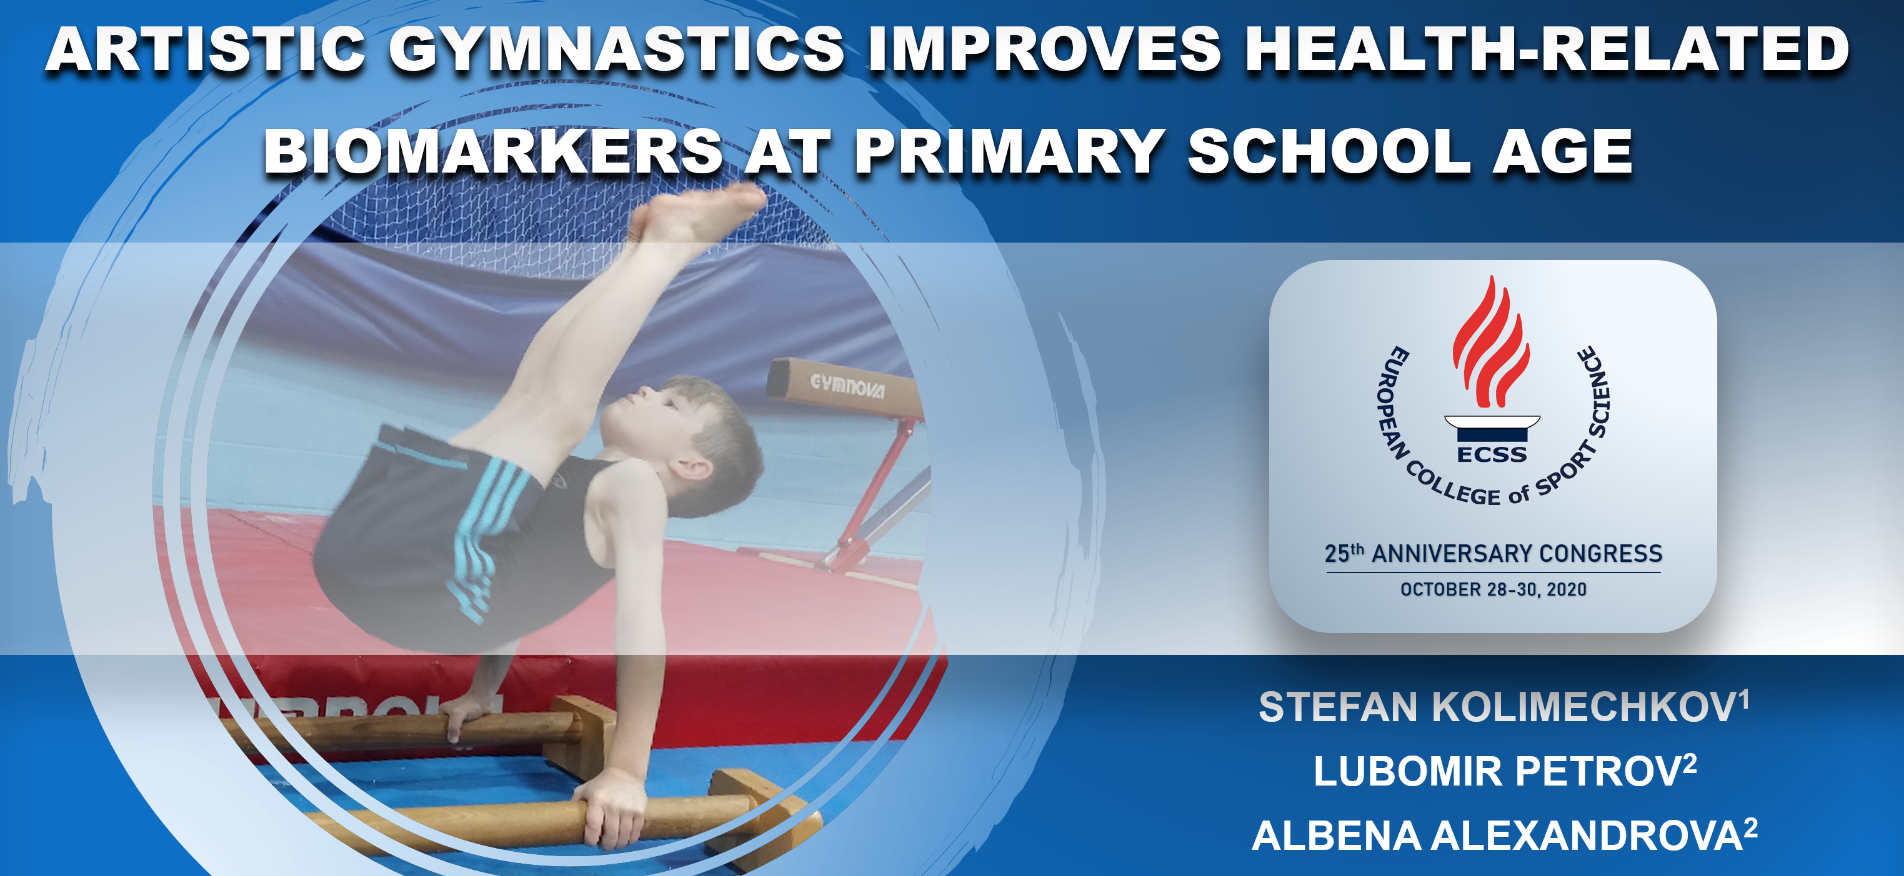 Artistic gymnastics improves health-related biomarkers at primary school age at the ECSS Virtual Congress 2020